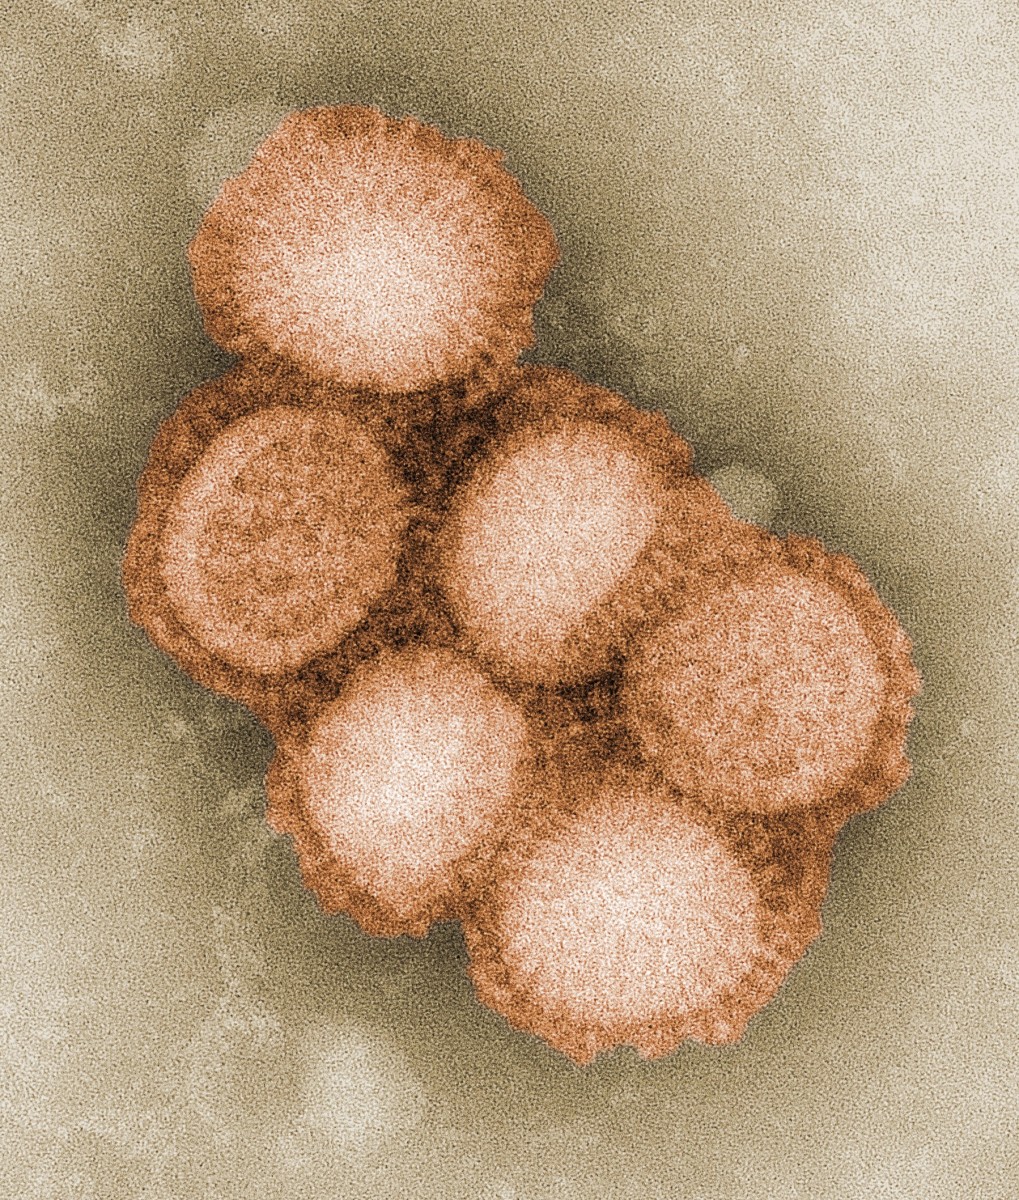 The H1N1 or swine flu virus (a colourized transmission electron micrograph)